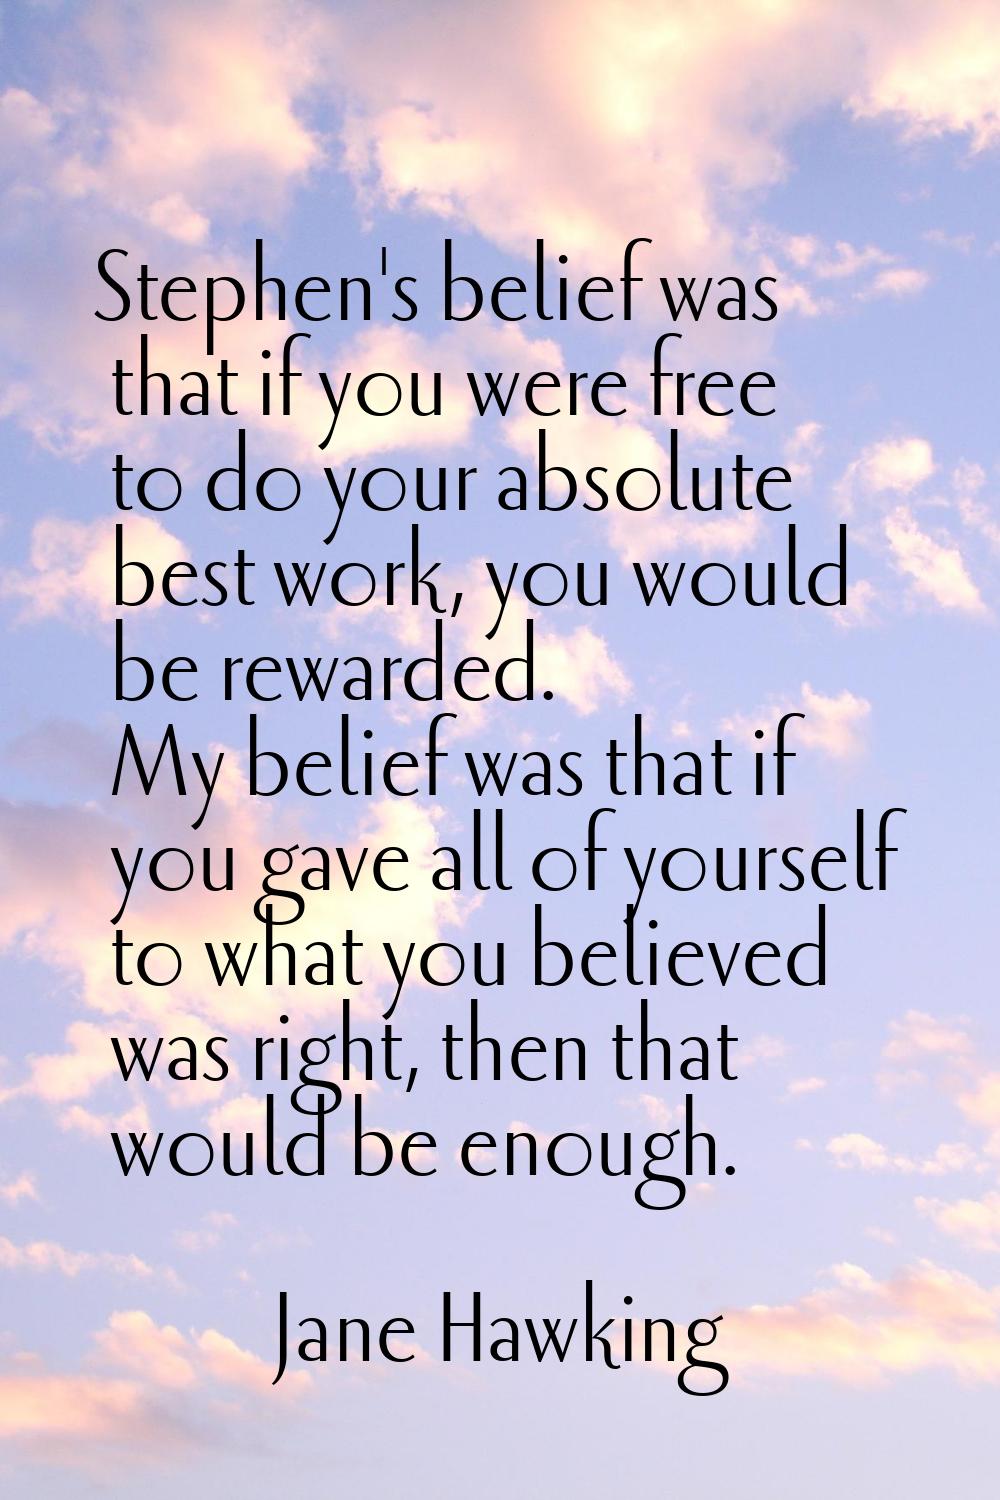 Stephen's belief was that if you were free to do your absolute best work, you would be rewarded. My